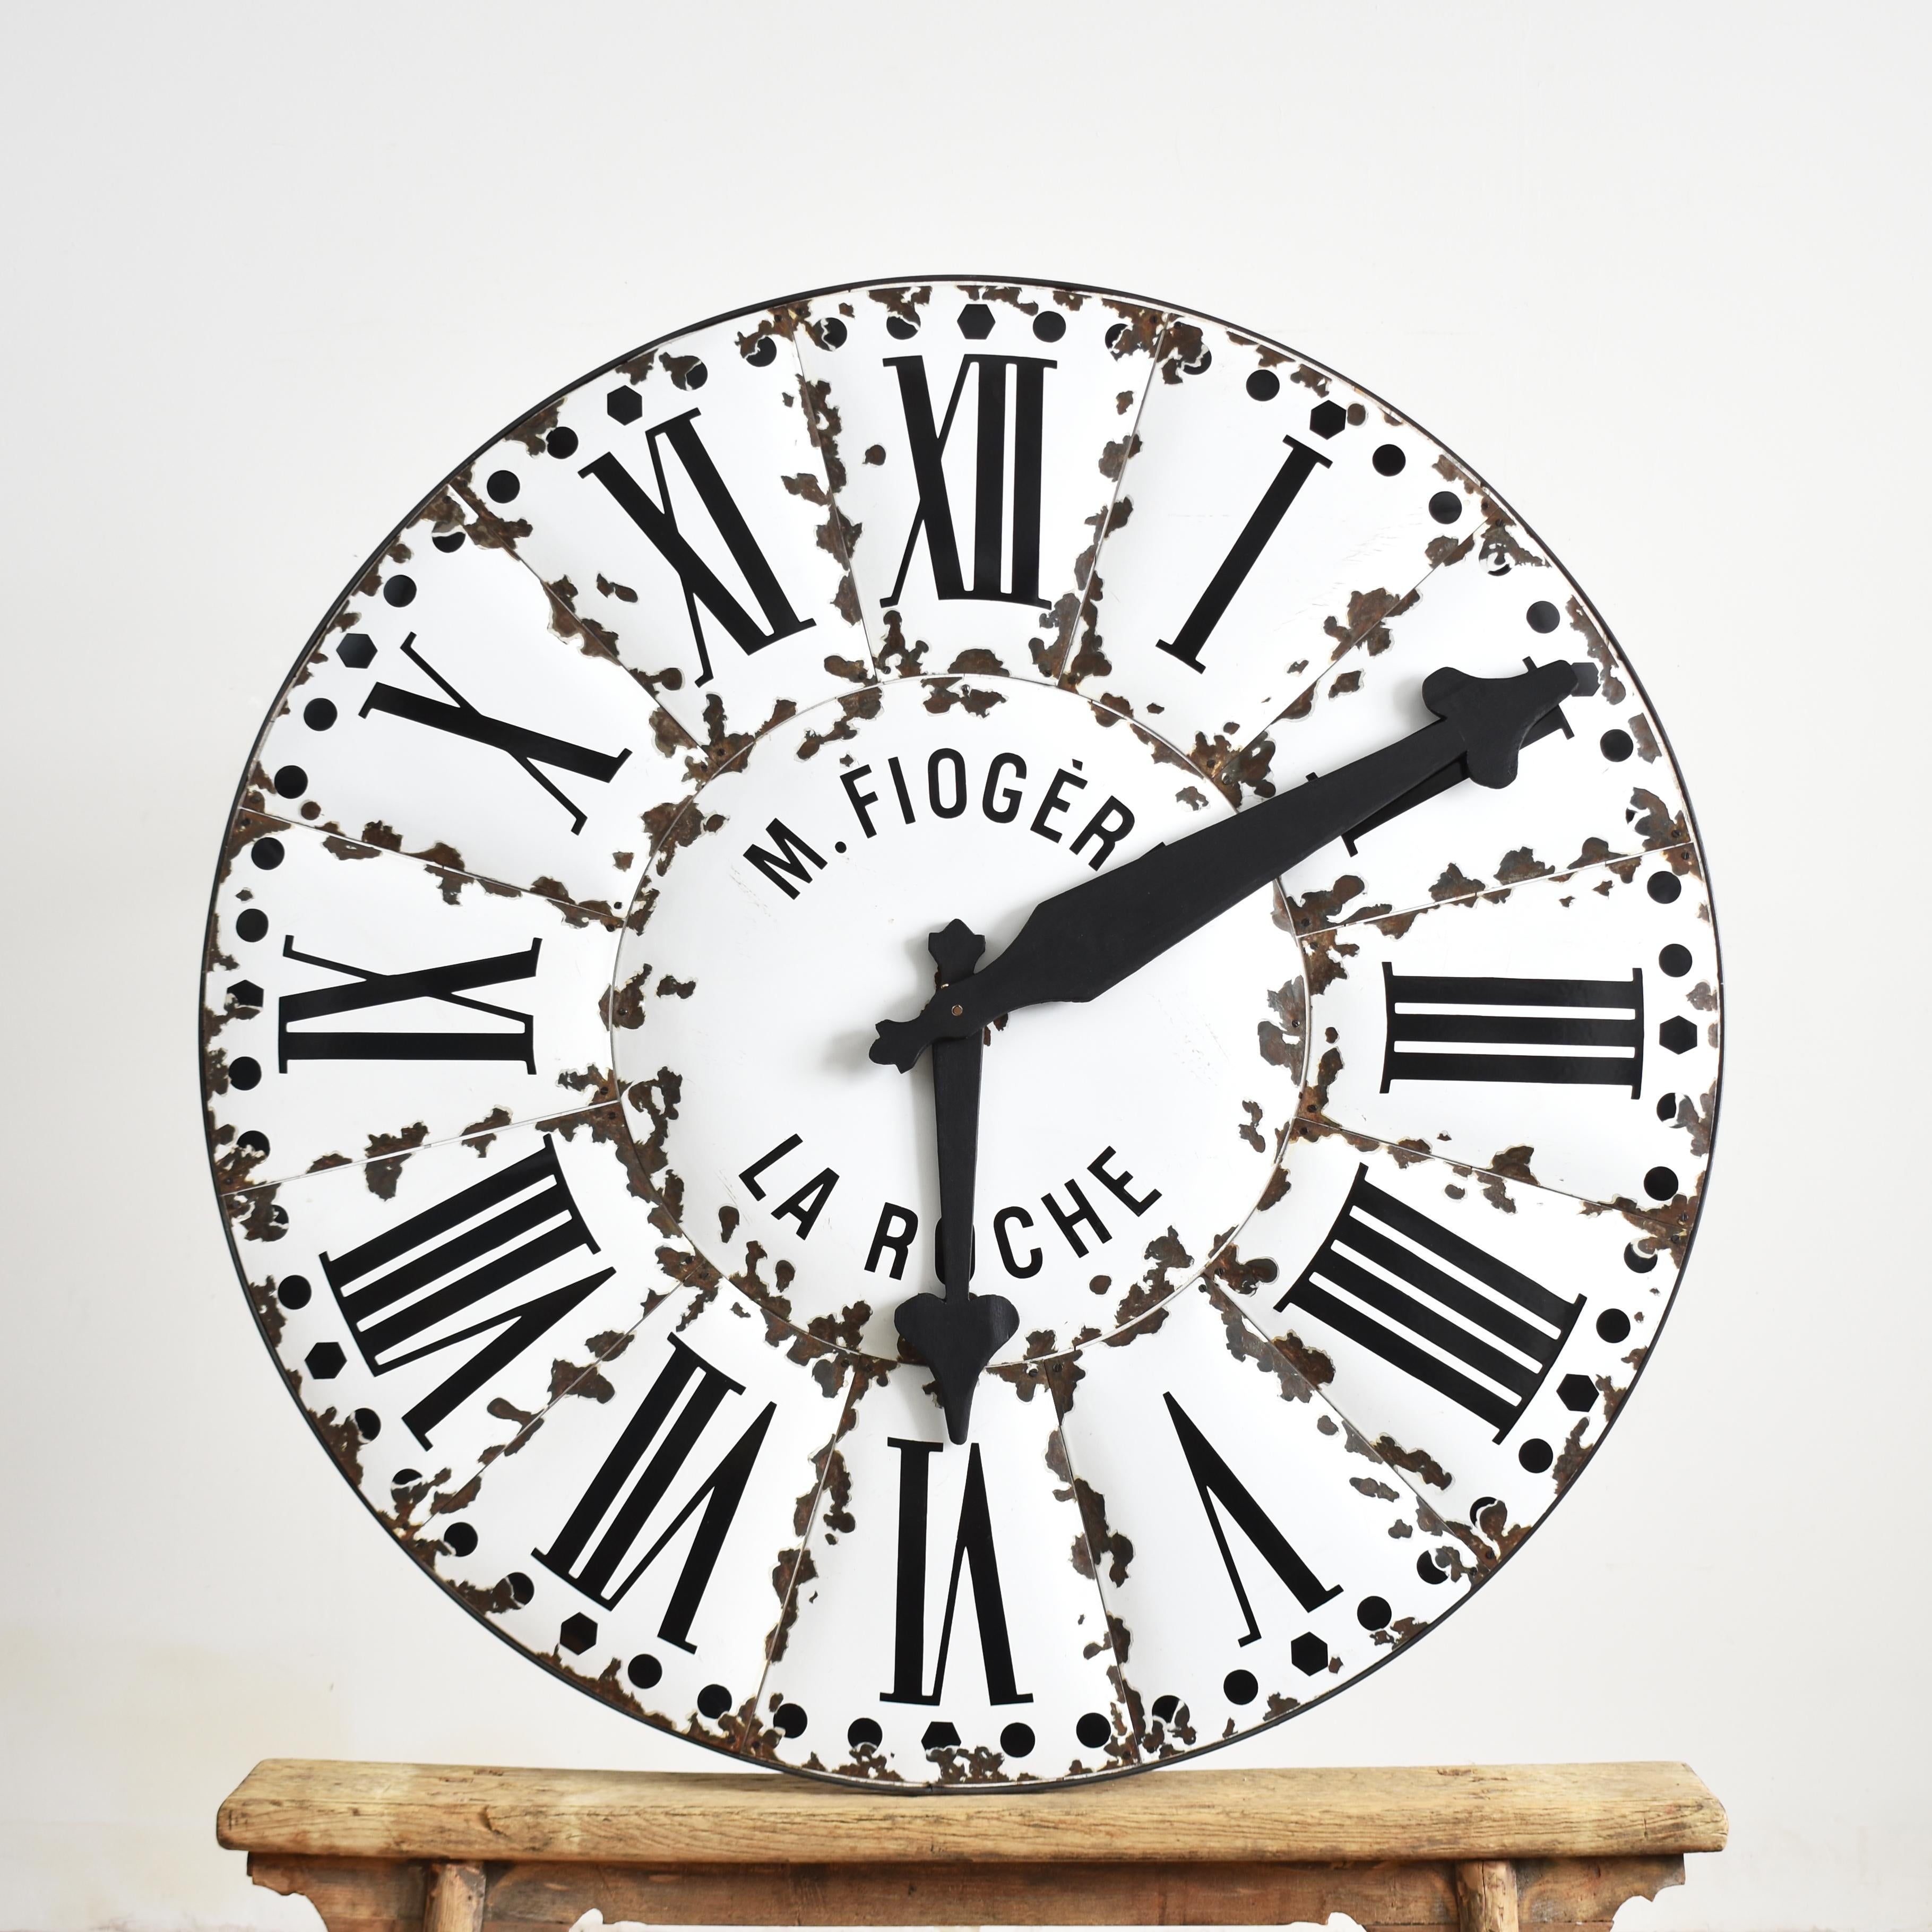 Large Original Enamel Antique French Tower Clock Face

A stunning turn of the century original turret clock face from La Roche, France. The clock face is made up of individual white enamel convex pieces with contrasting black Roman numerals. The